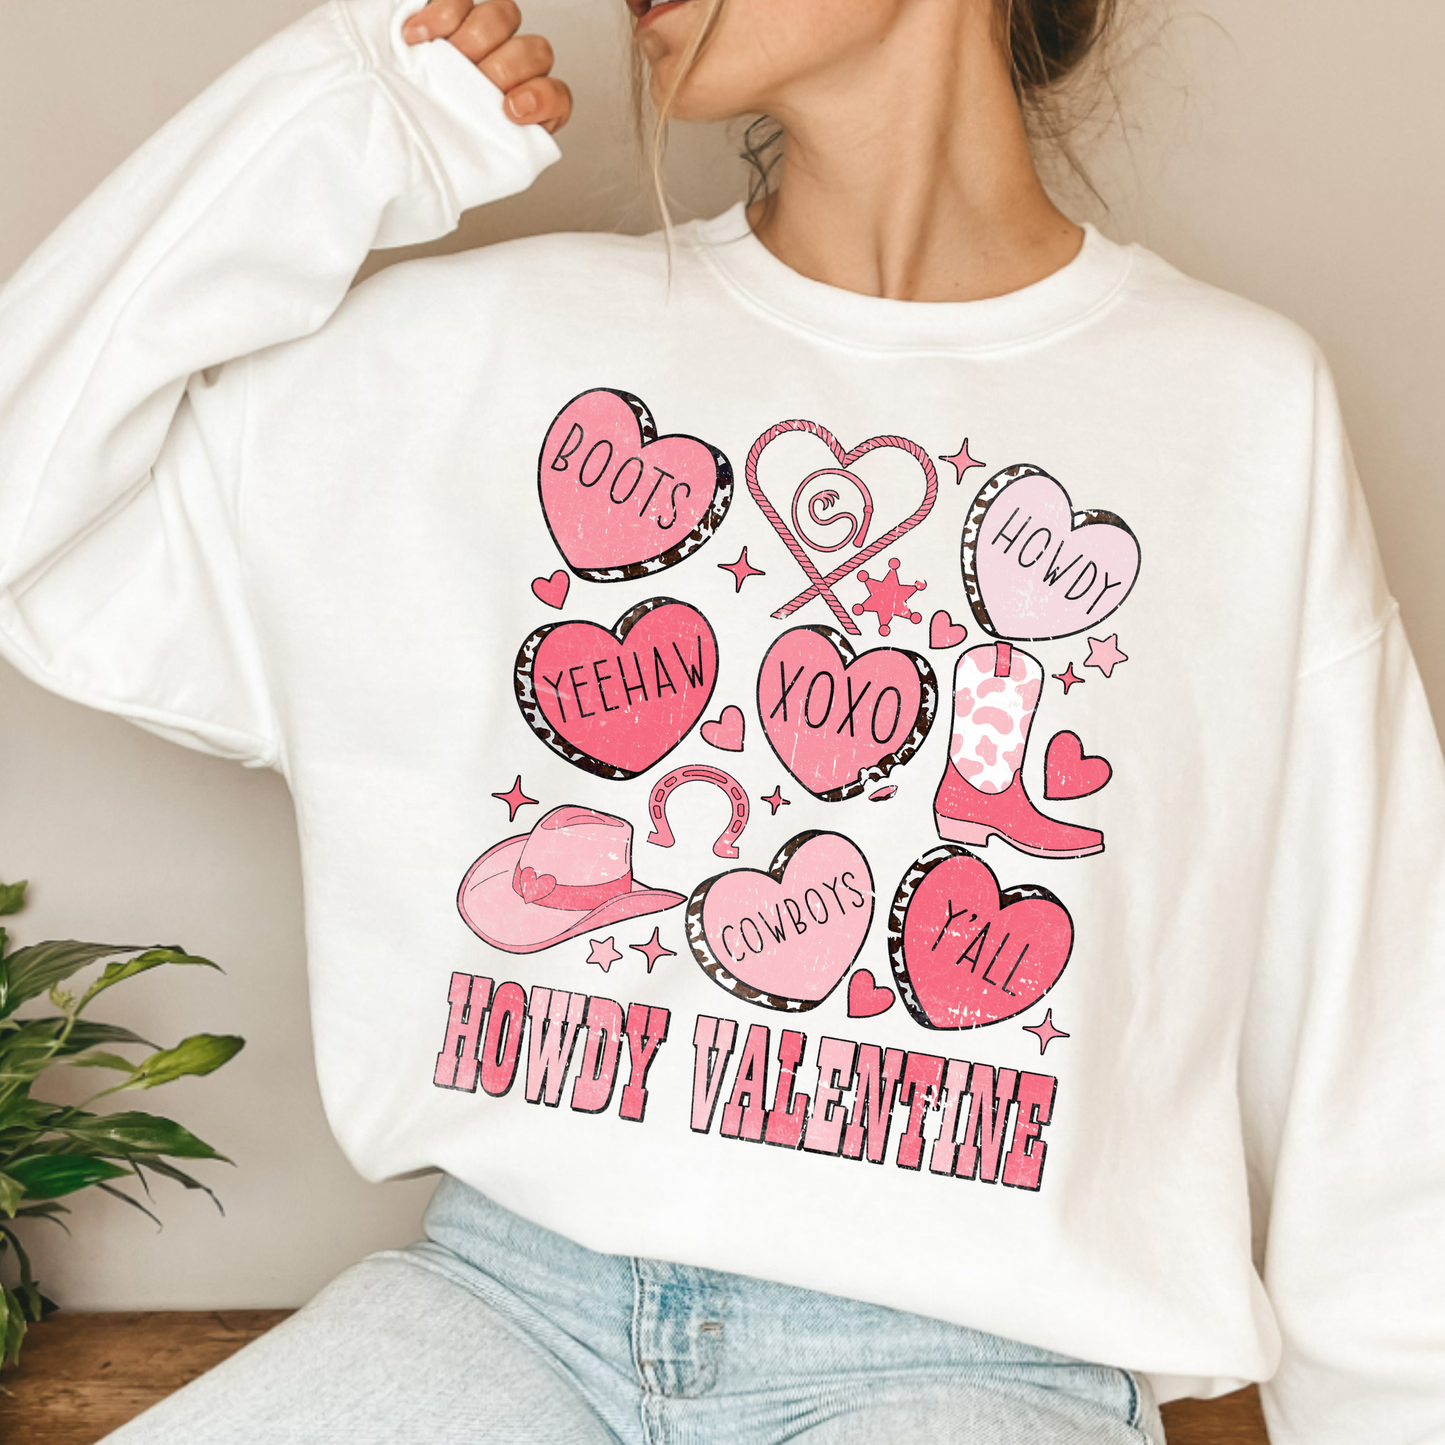 (Shirt not included) Howdy Valentine - Clear Film Transfer